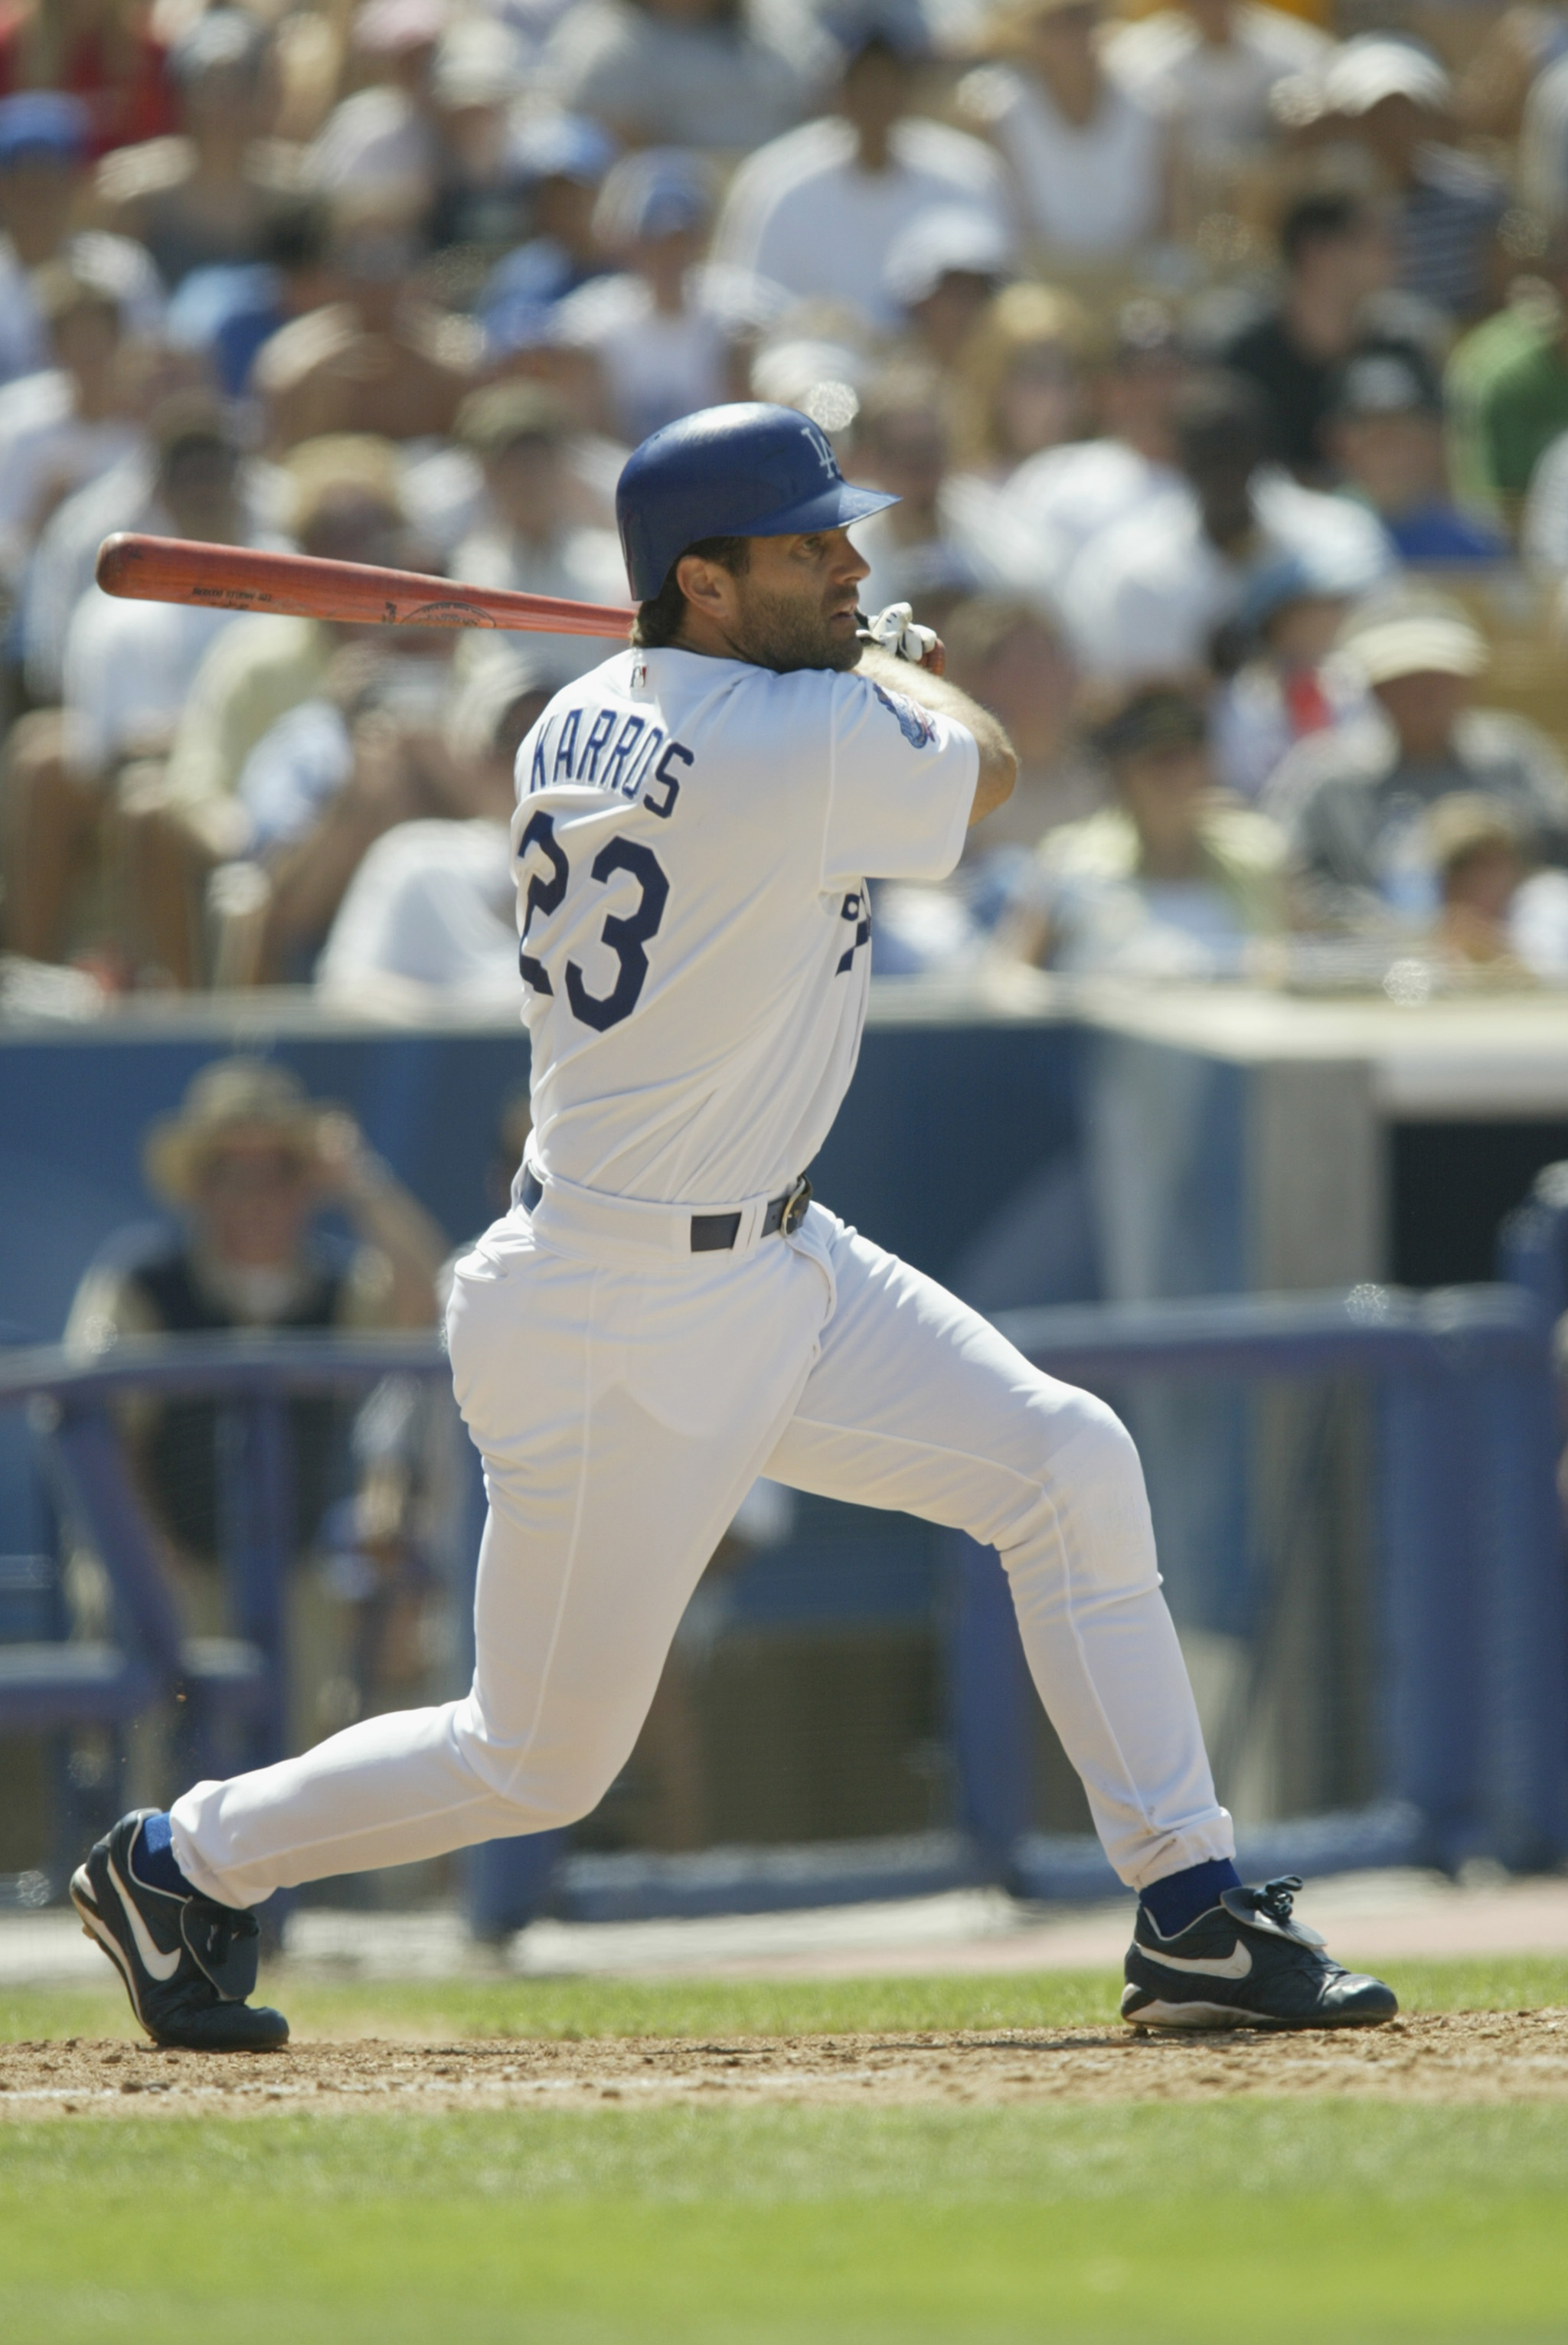 Eric Karros' Greatest Moments, Take a look back at Eric Karros' Dodgers  career., By Los Angeles Dodgers Highlights